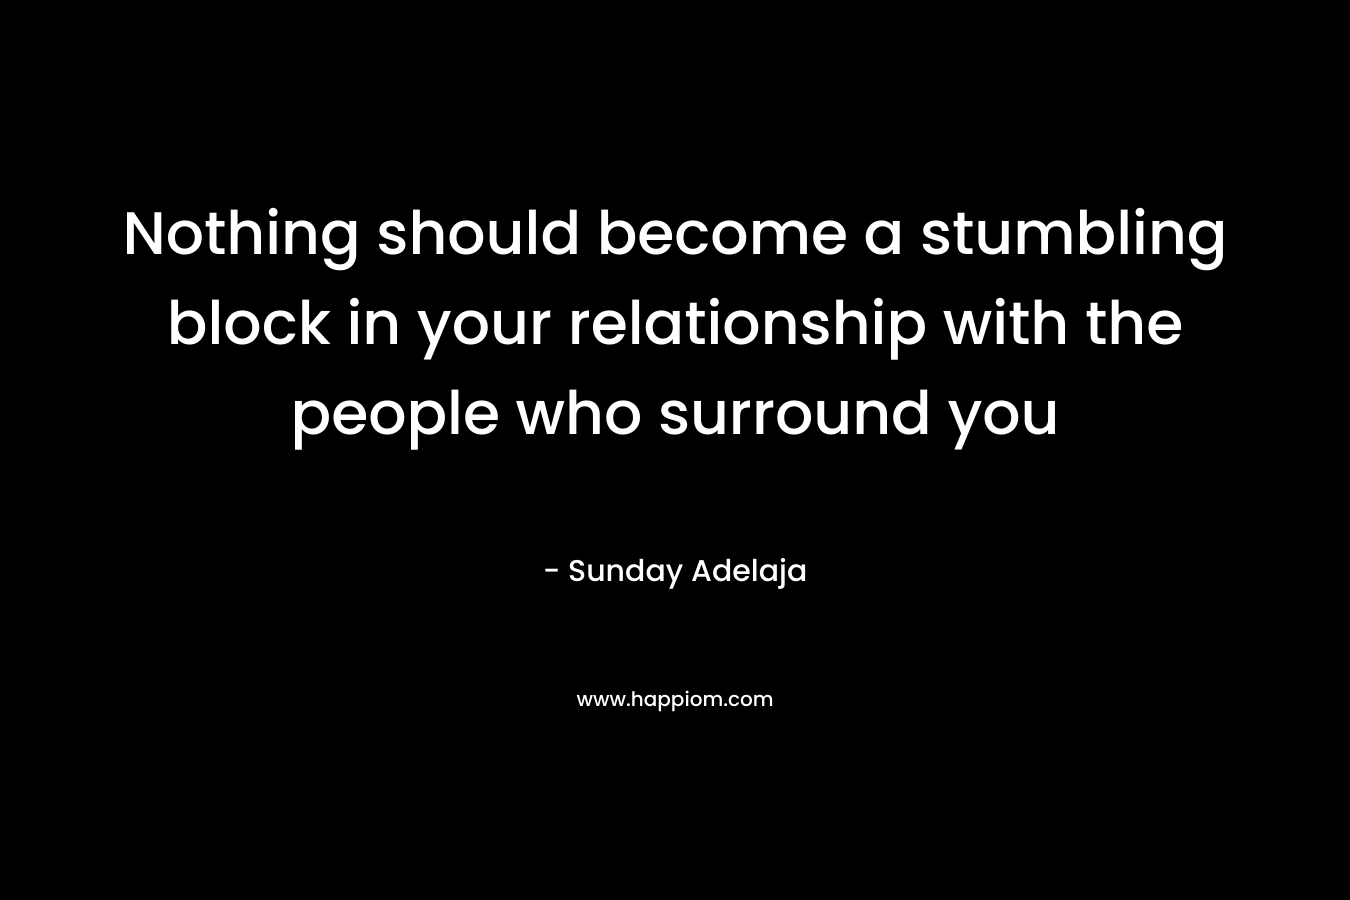 Nothing should become a stumbling block in your relationship with the people who surround you